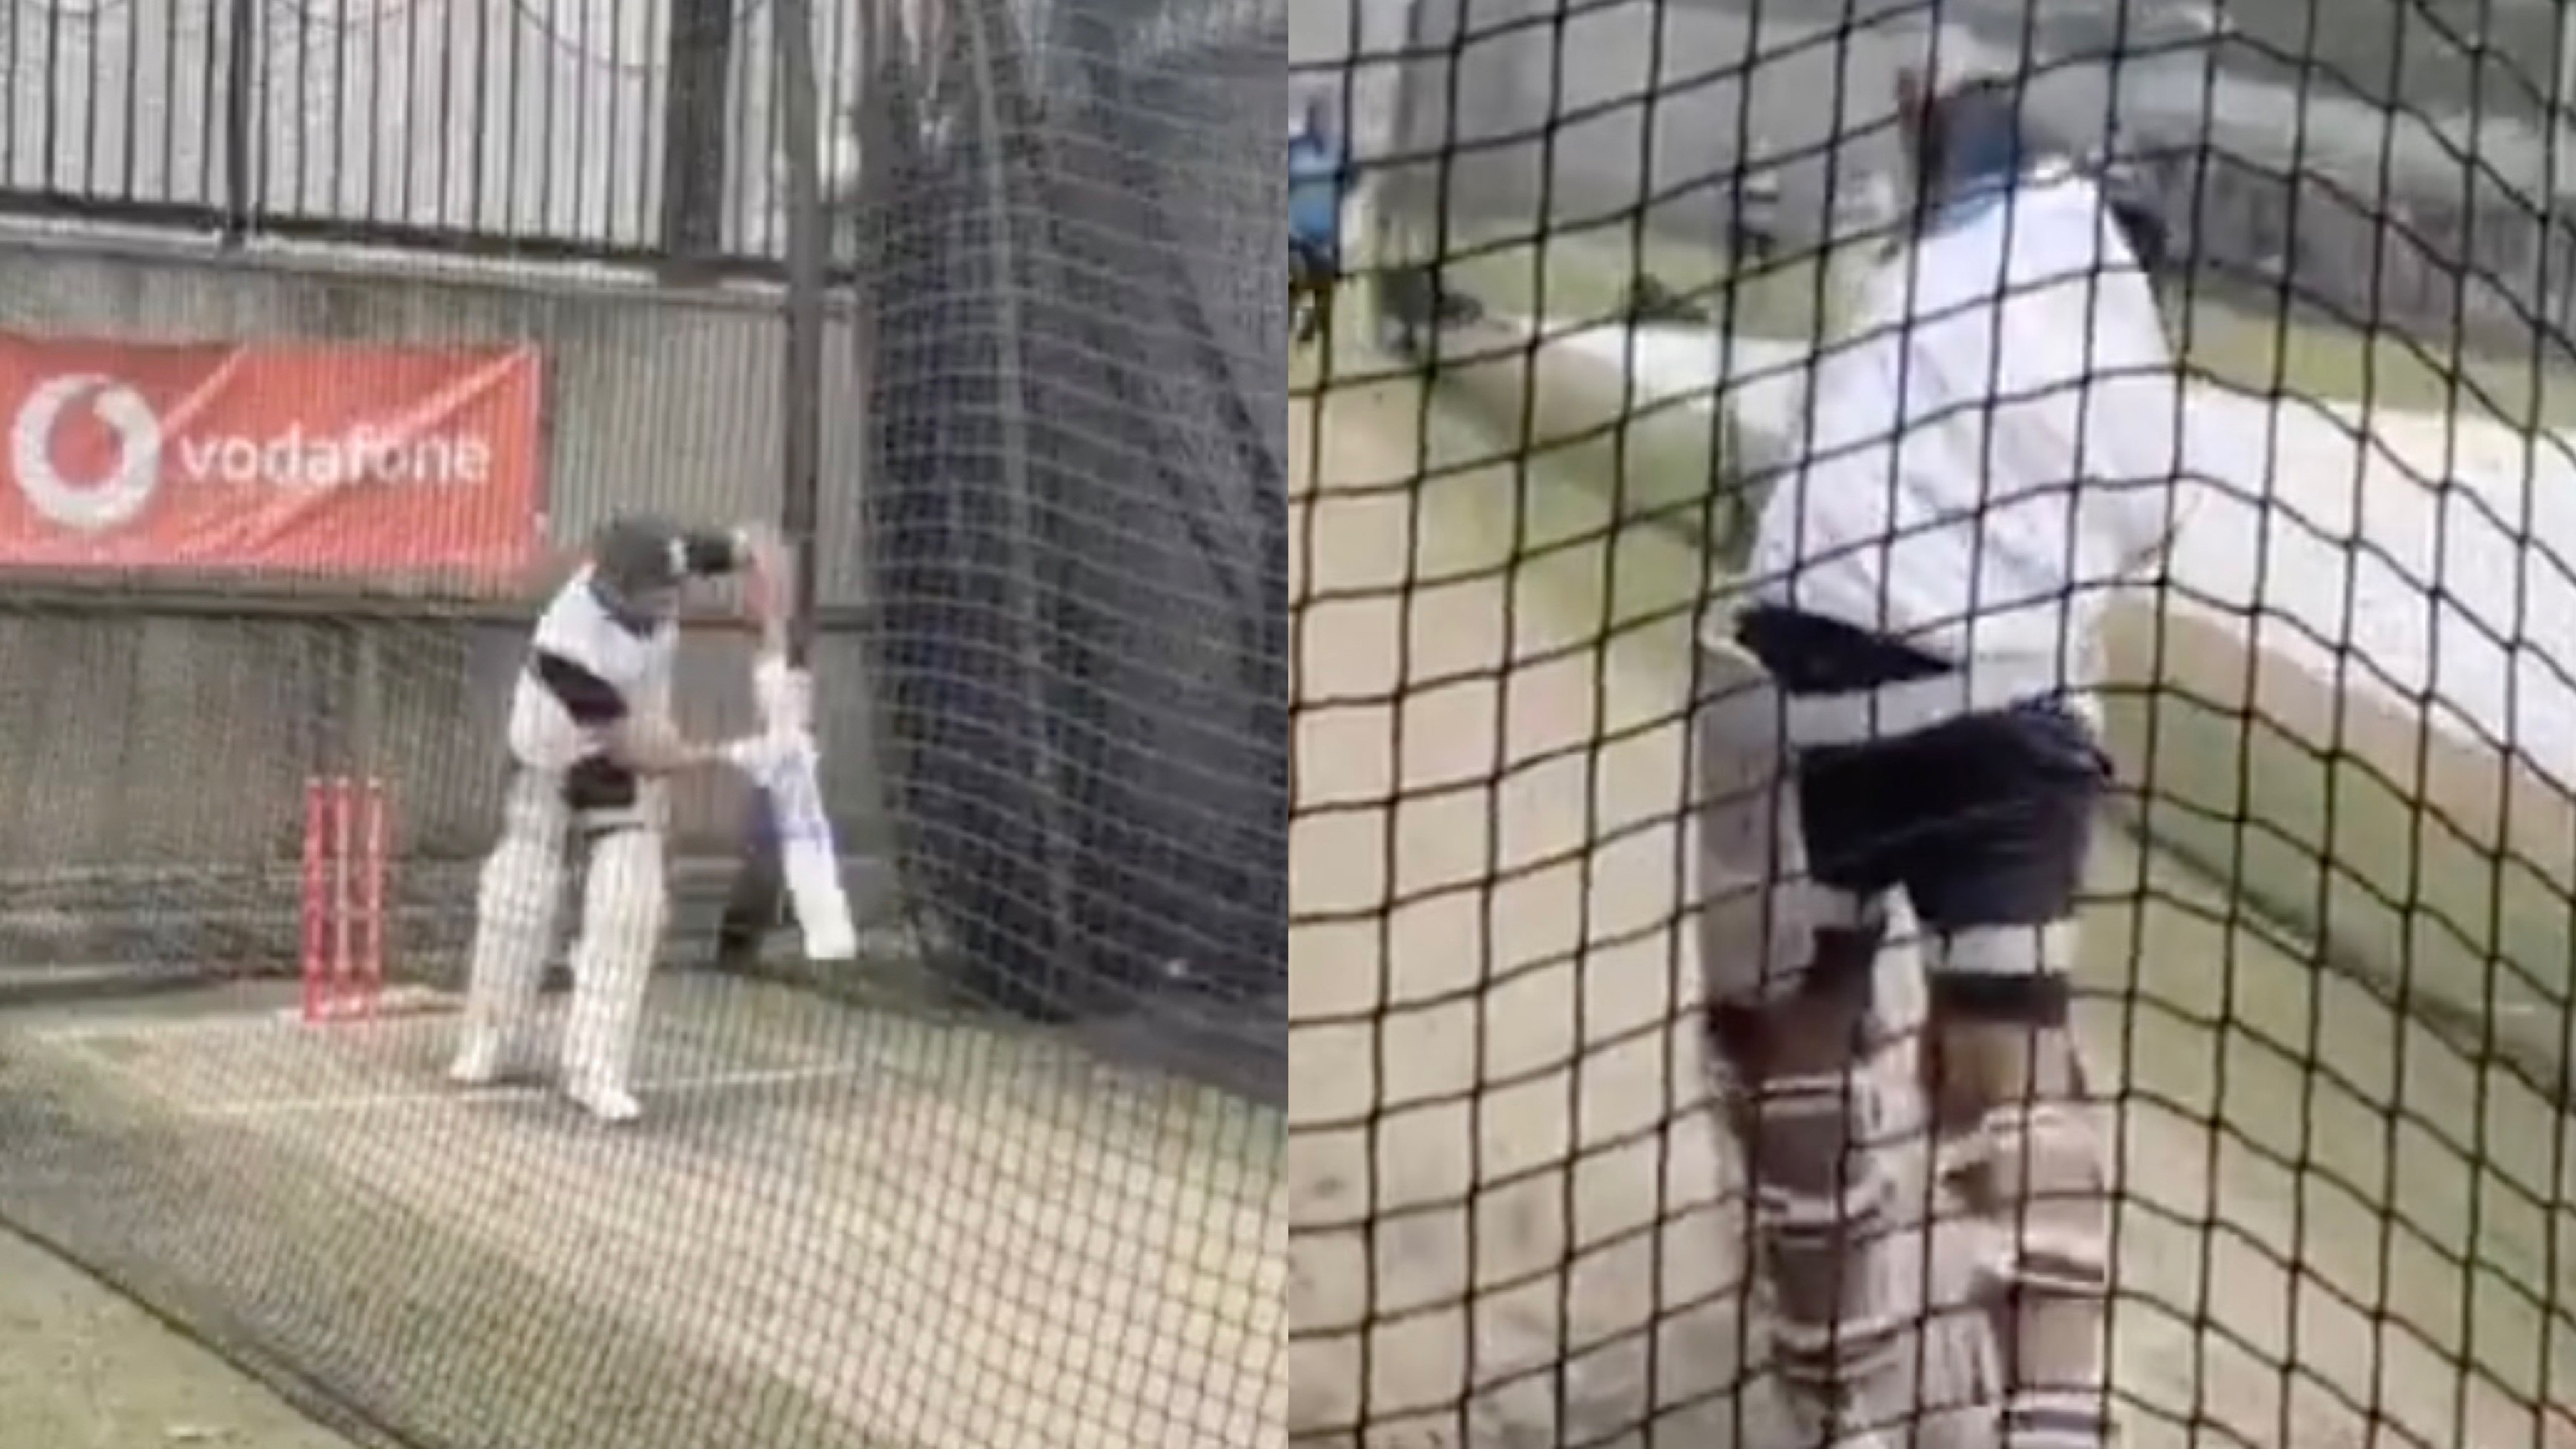 AUS v IND 2020-21: WATCH - Rohit Sharma hits the nets in Melbourne